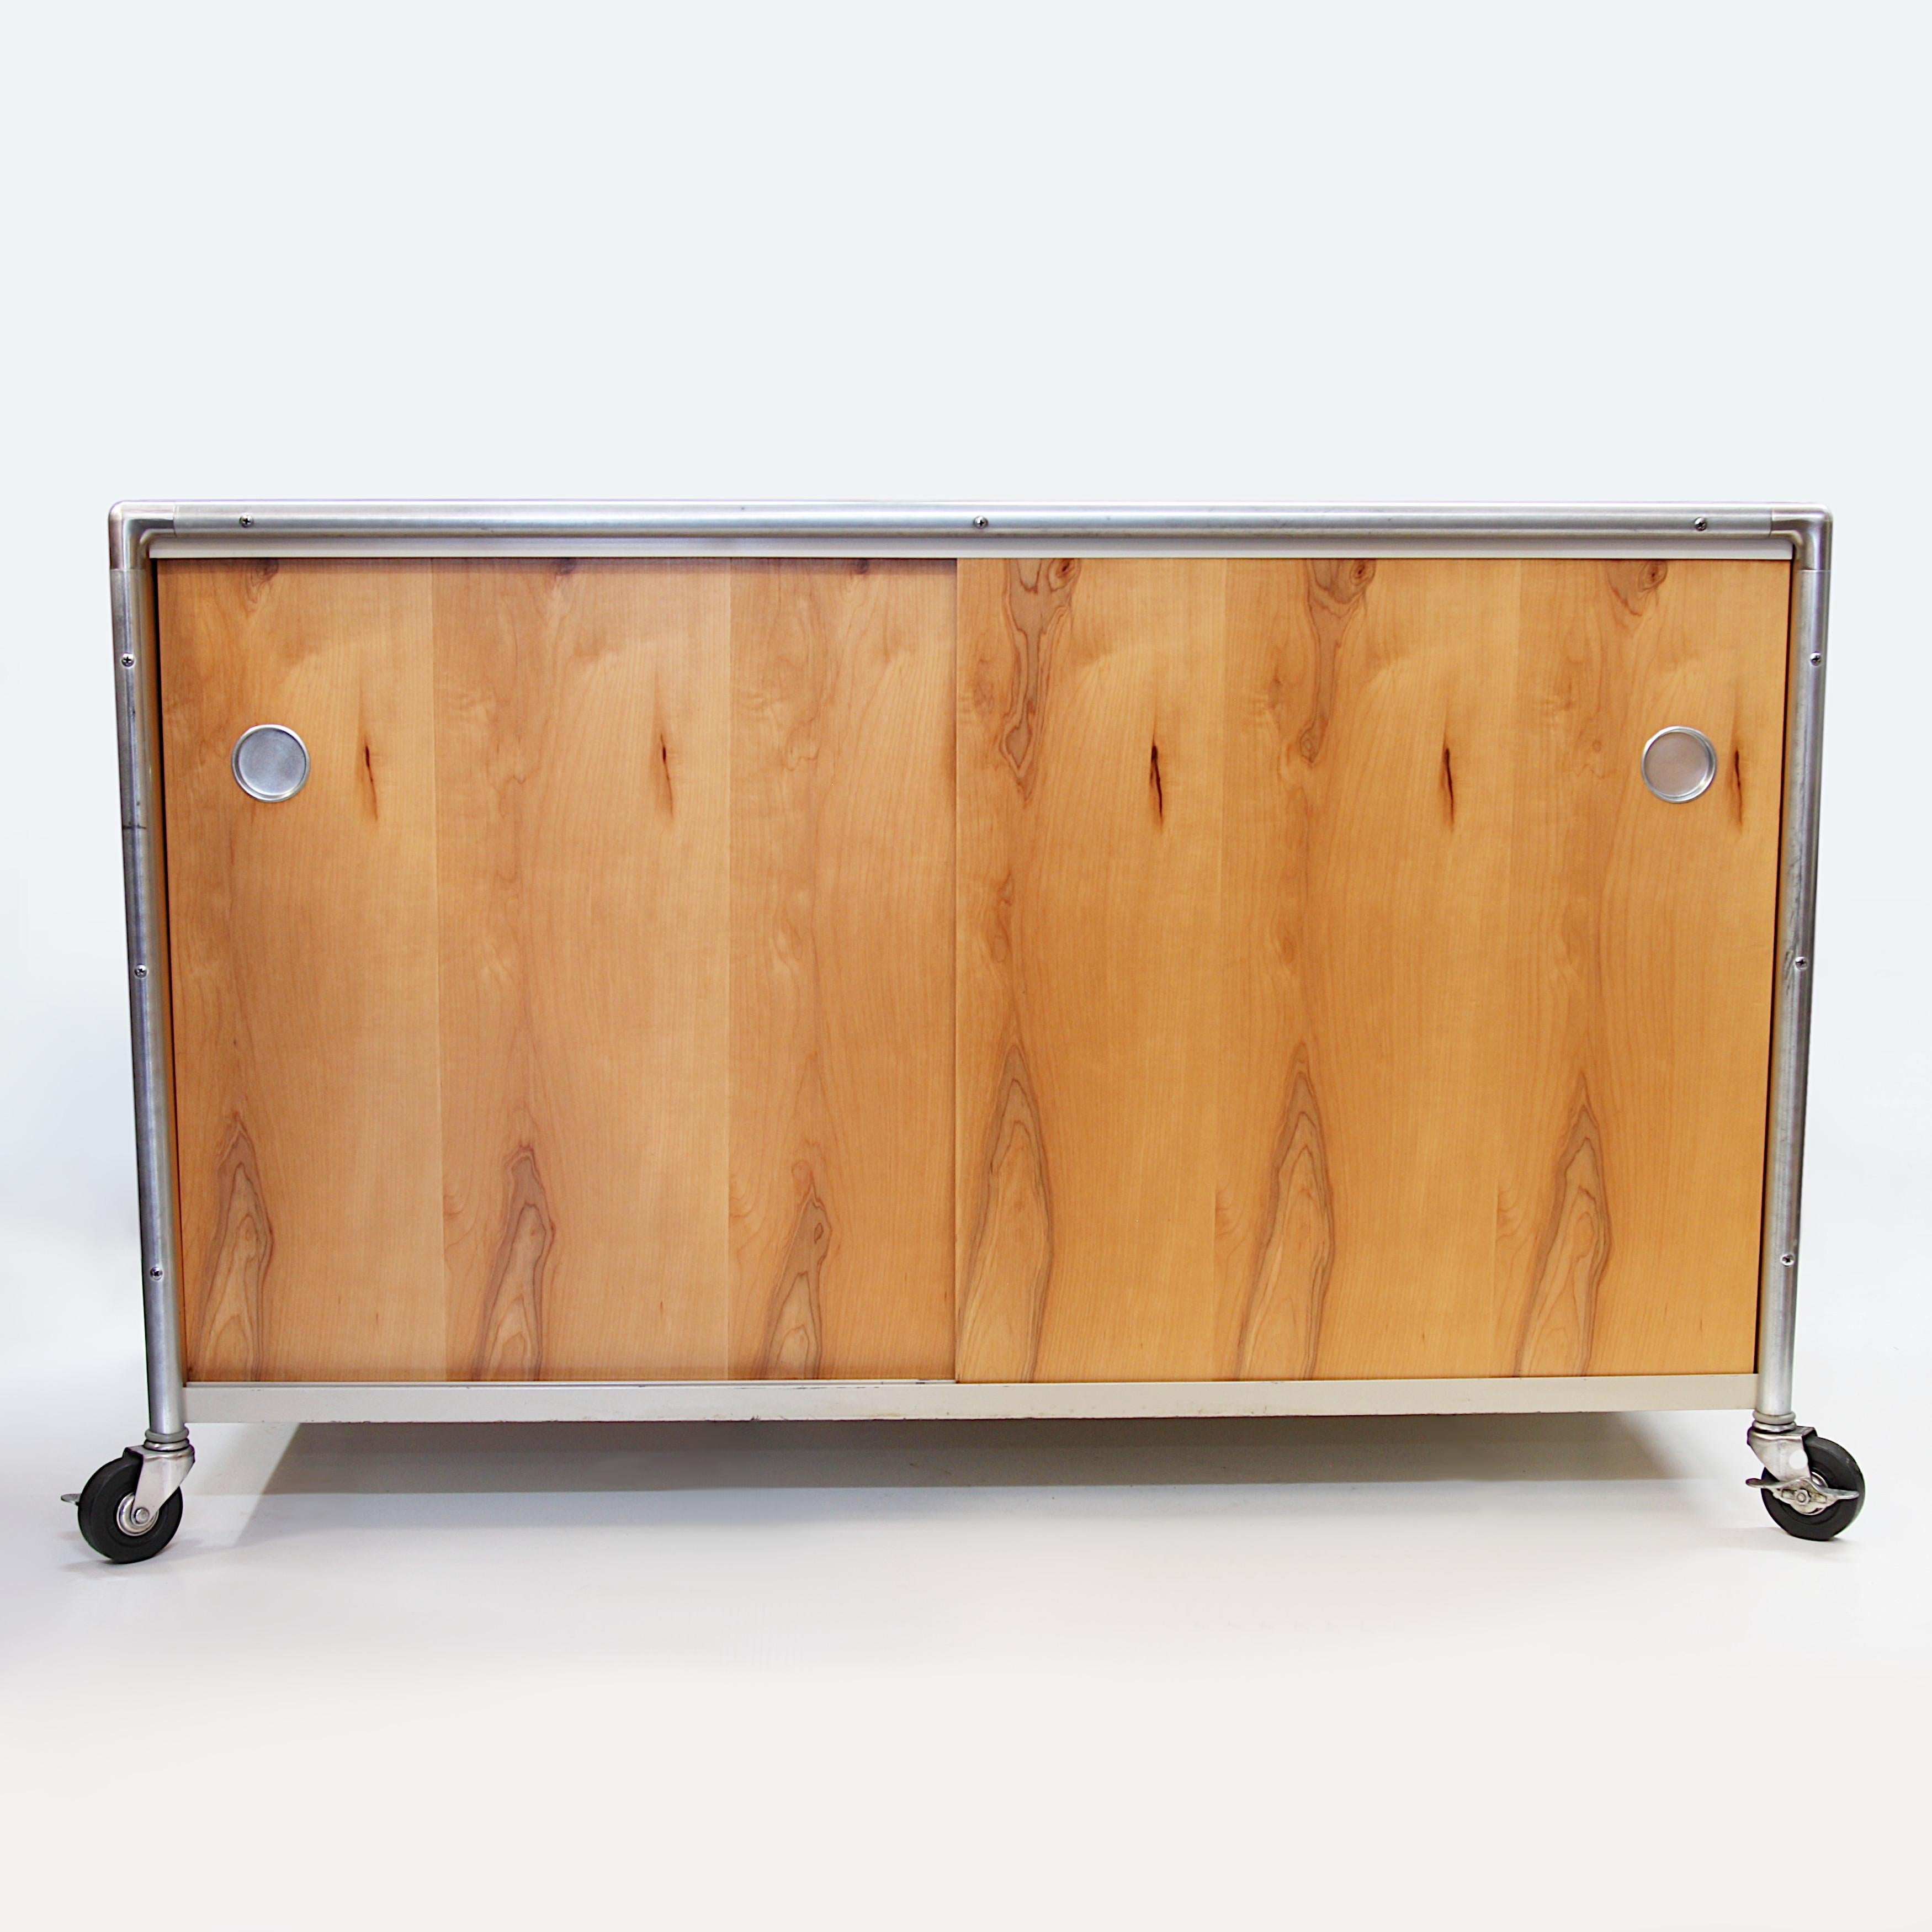 North American Vintage Mid-Century Modern Industrial Rolling Credenza Cabinet by Henry P Glass